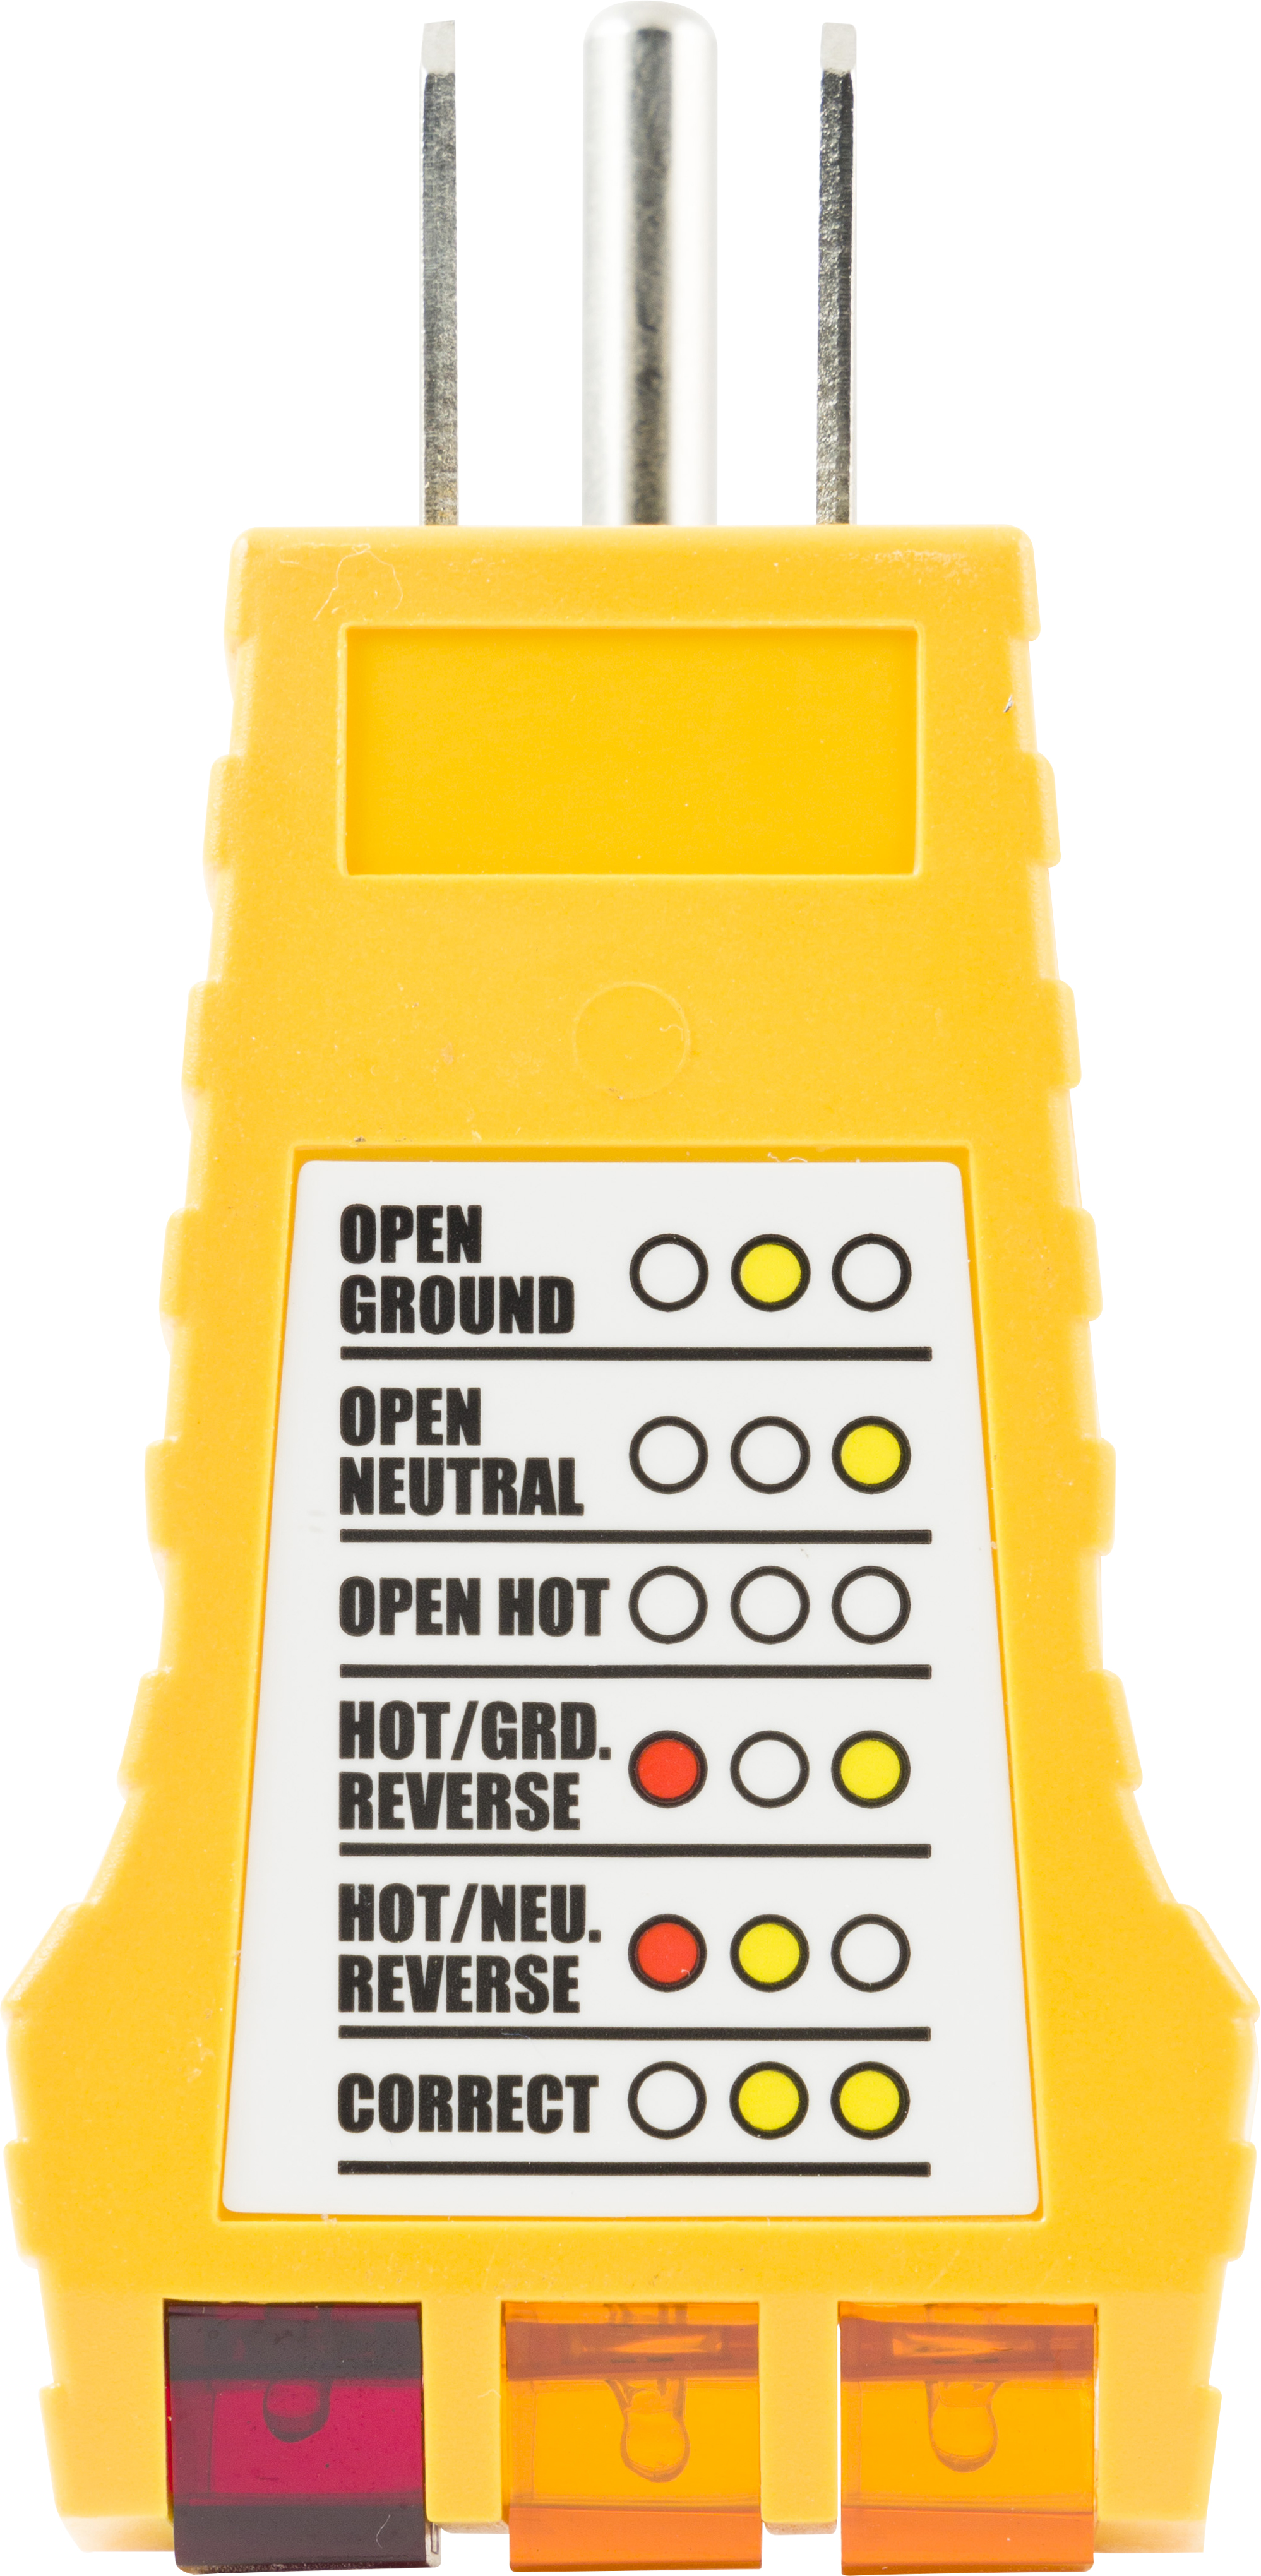 Power Gear Receptacle Tester – 50542 - image 1 of 6